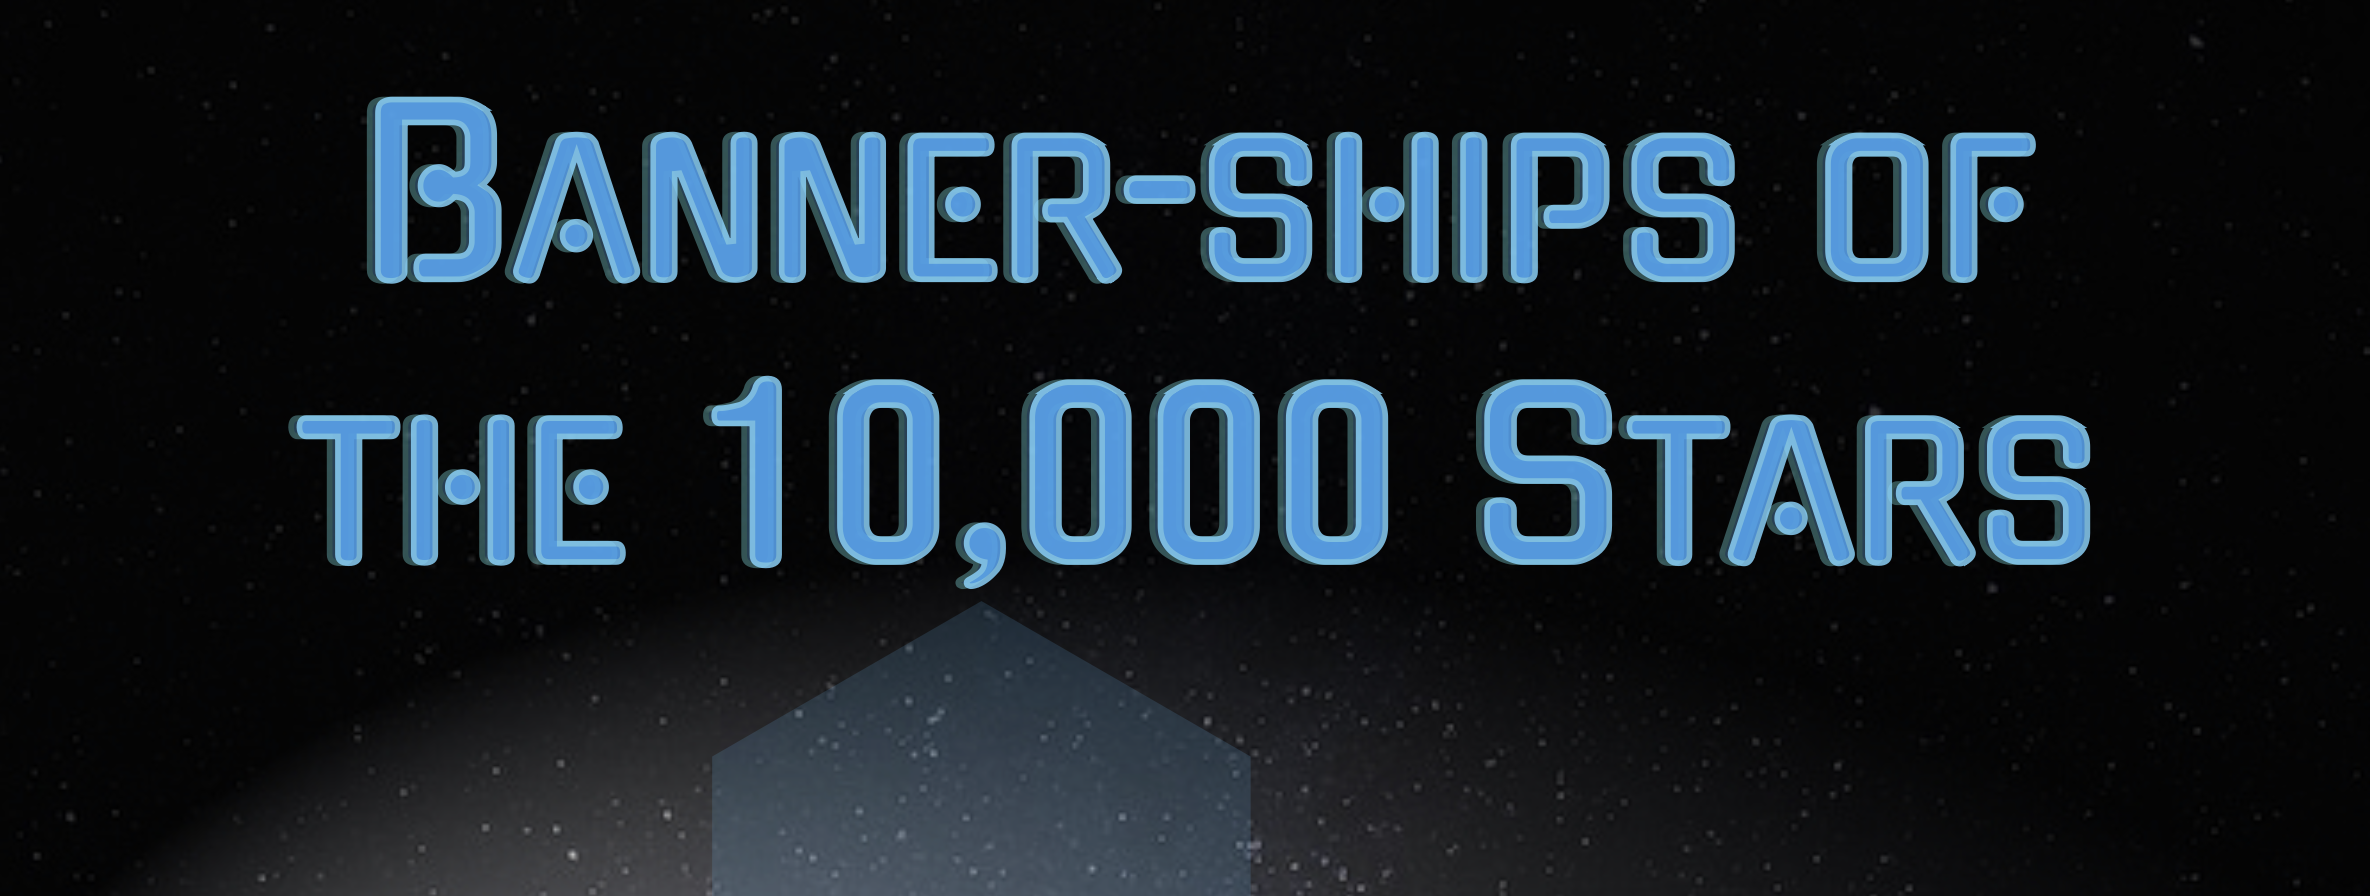 Banner-ships of the 10,000 Stars